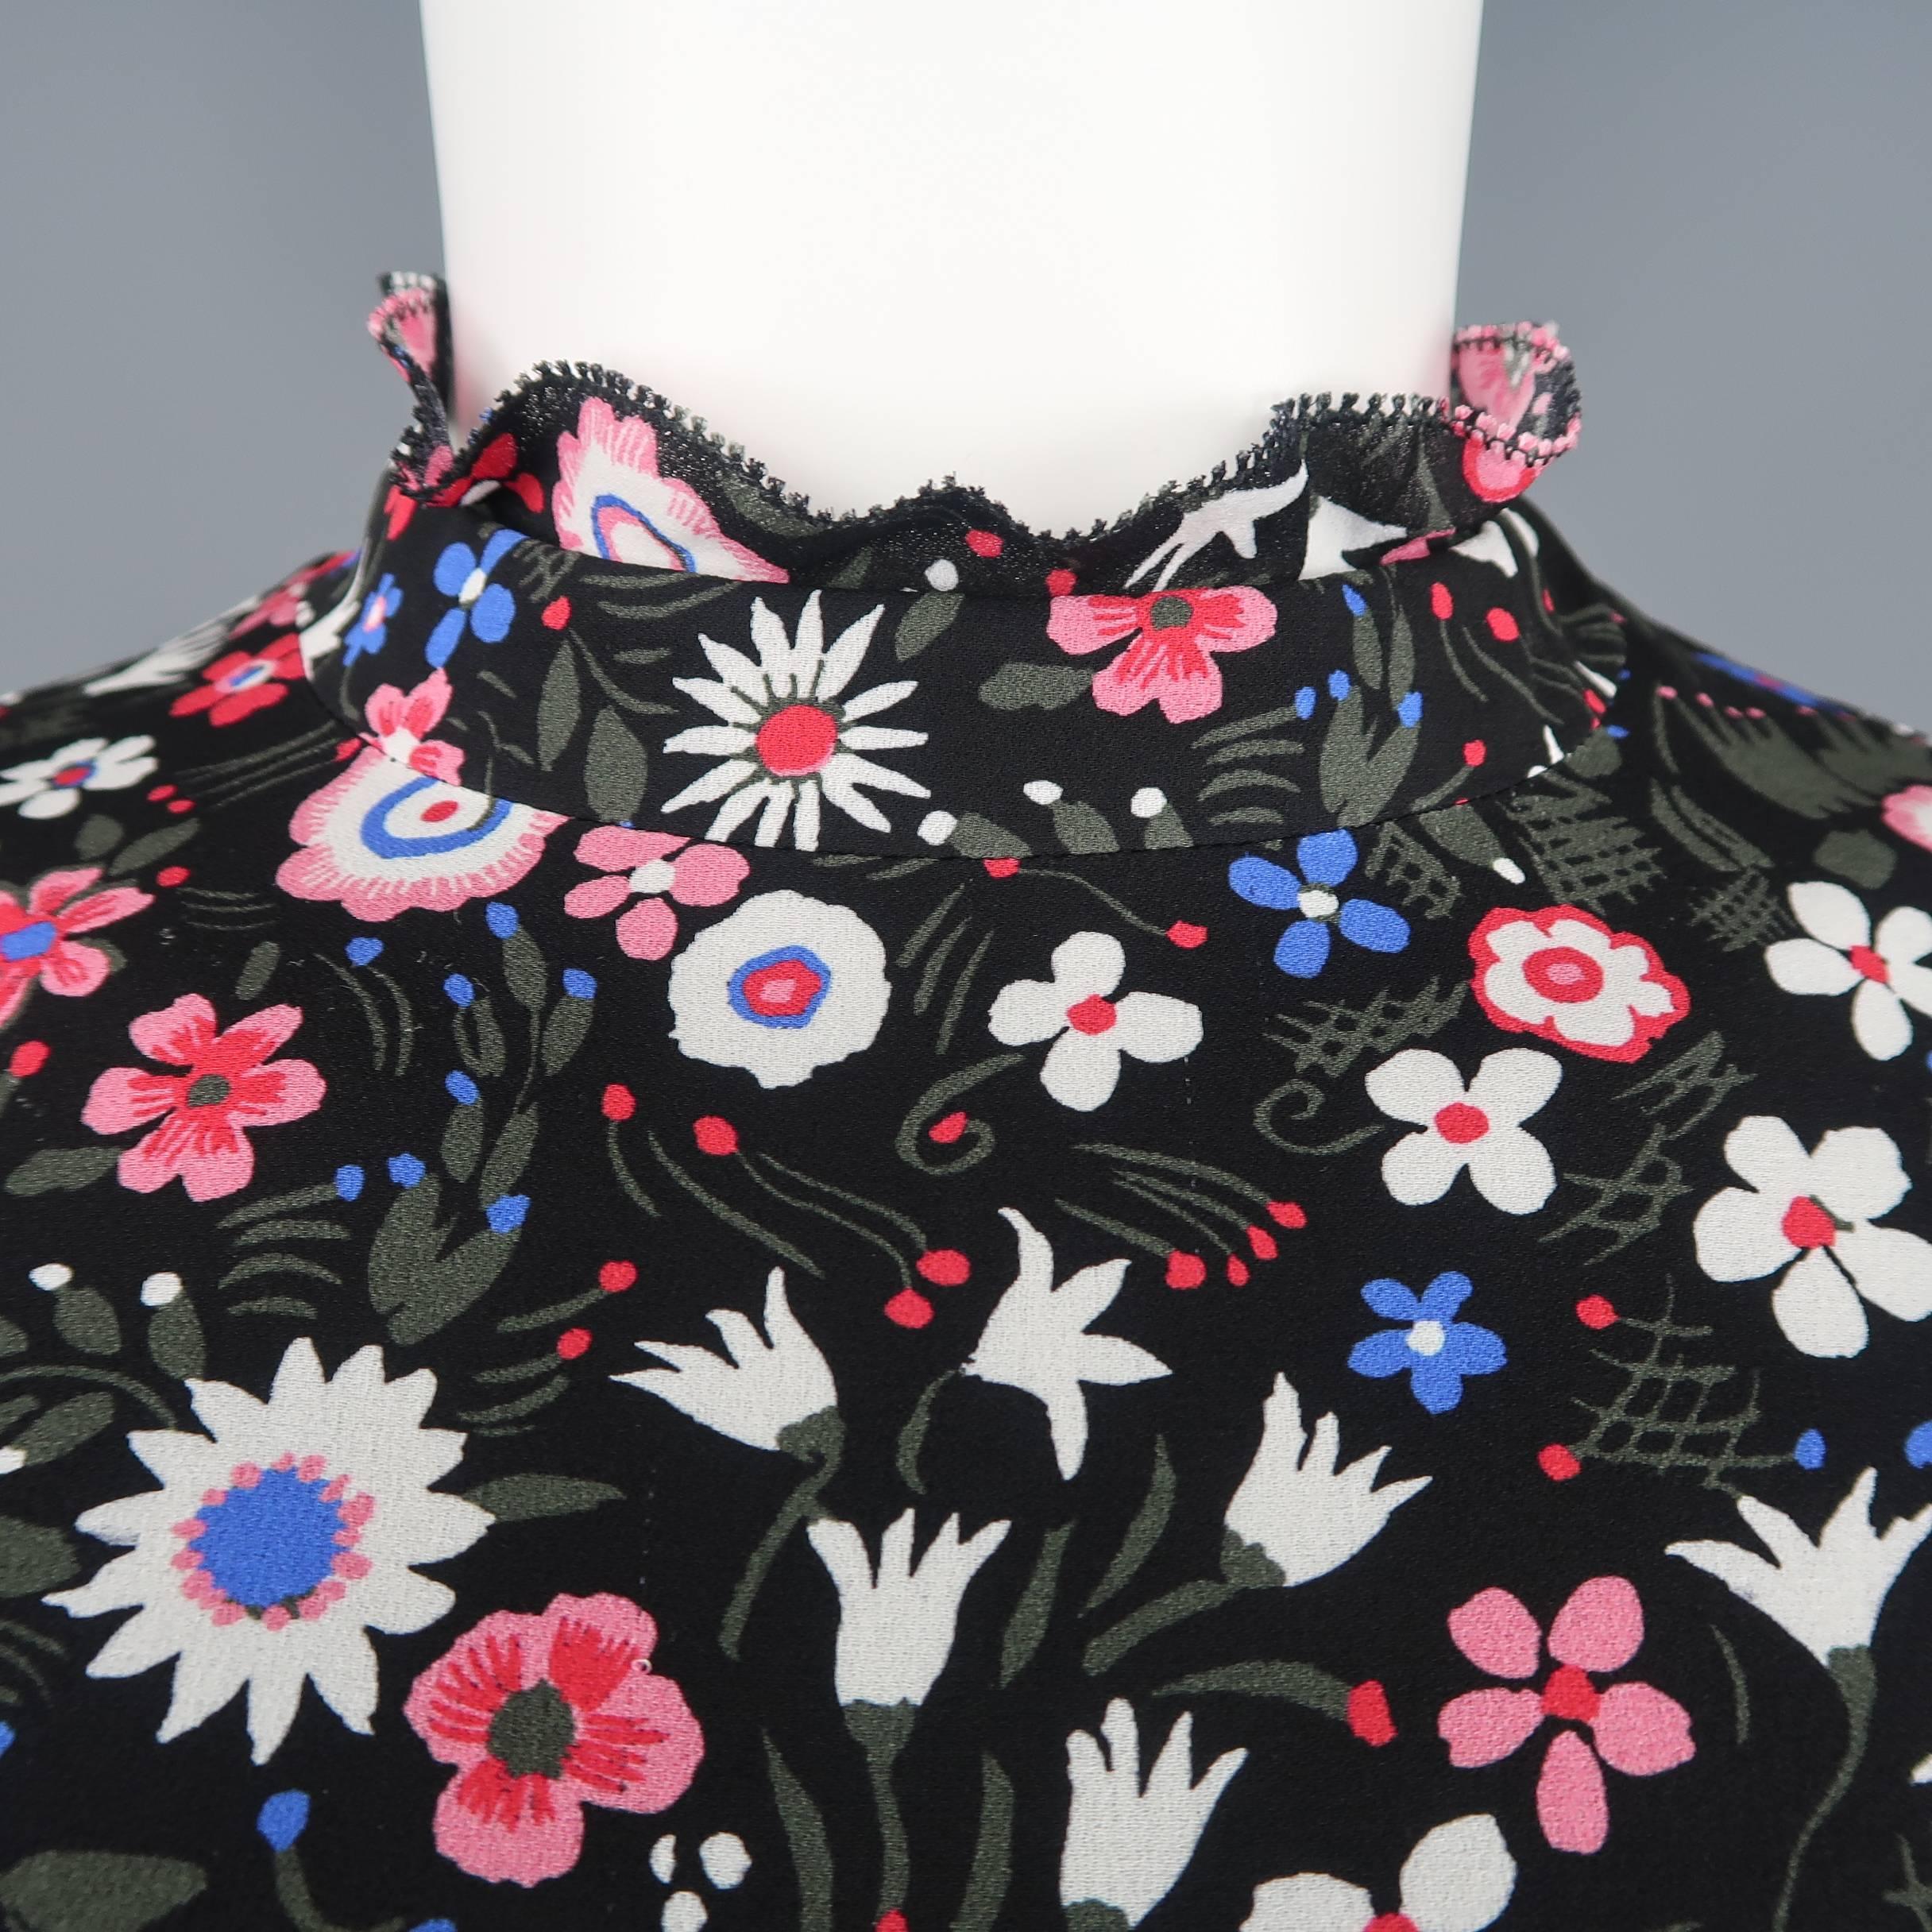 VALENTINO tunic dress comes in black silk with all over pink, blue, and white floral print and features a ruffled band collar, a line silhouette, and button cuffed shirt sleeves. Made in Italy.
 
Excellent Pre-Owned Condition.
Marked: 4
